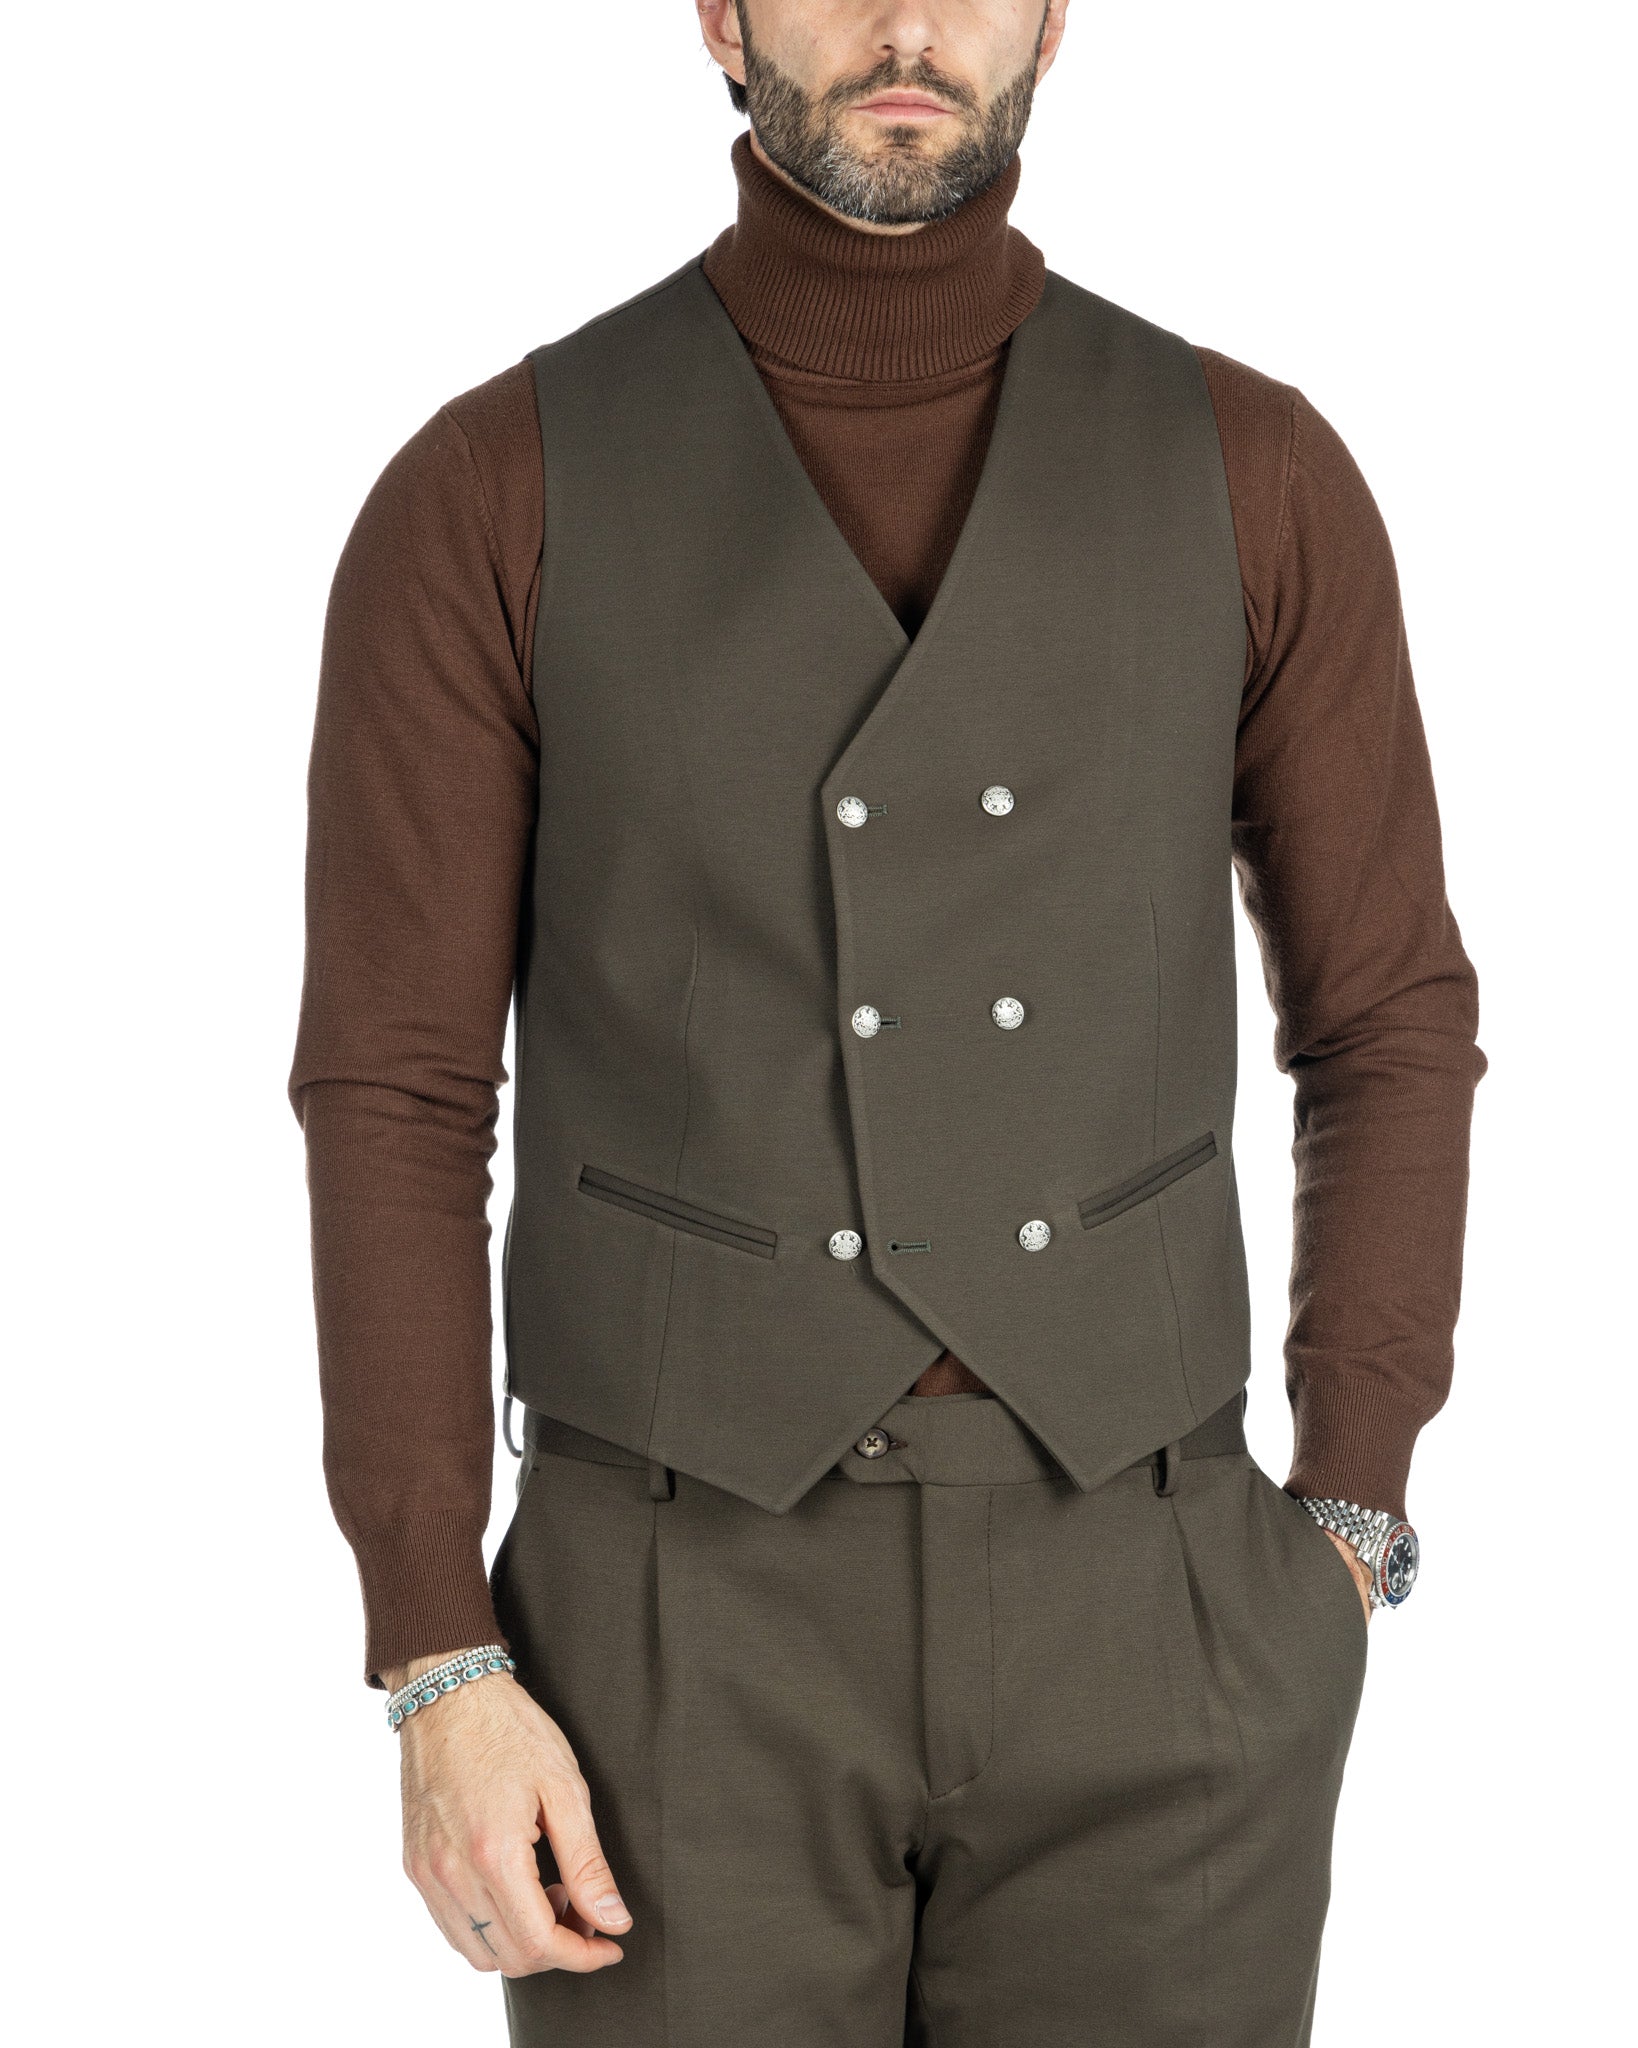 Mustang - double-breasted waistcoat in military milan stitch